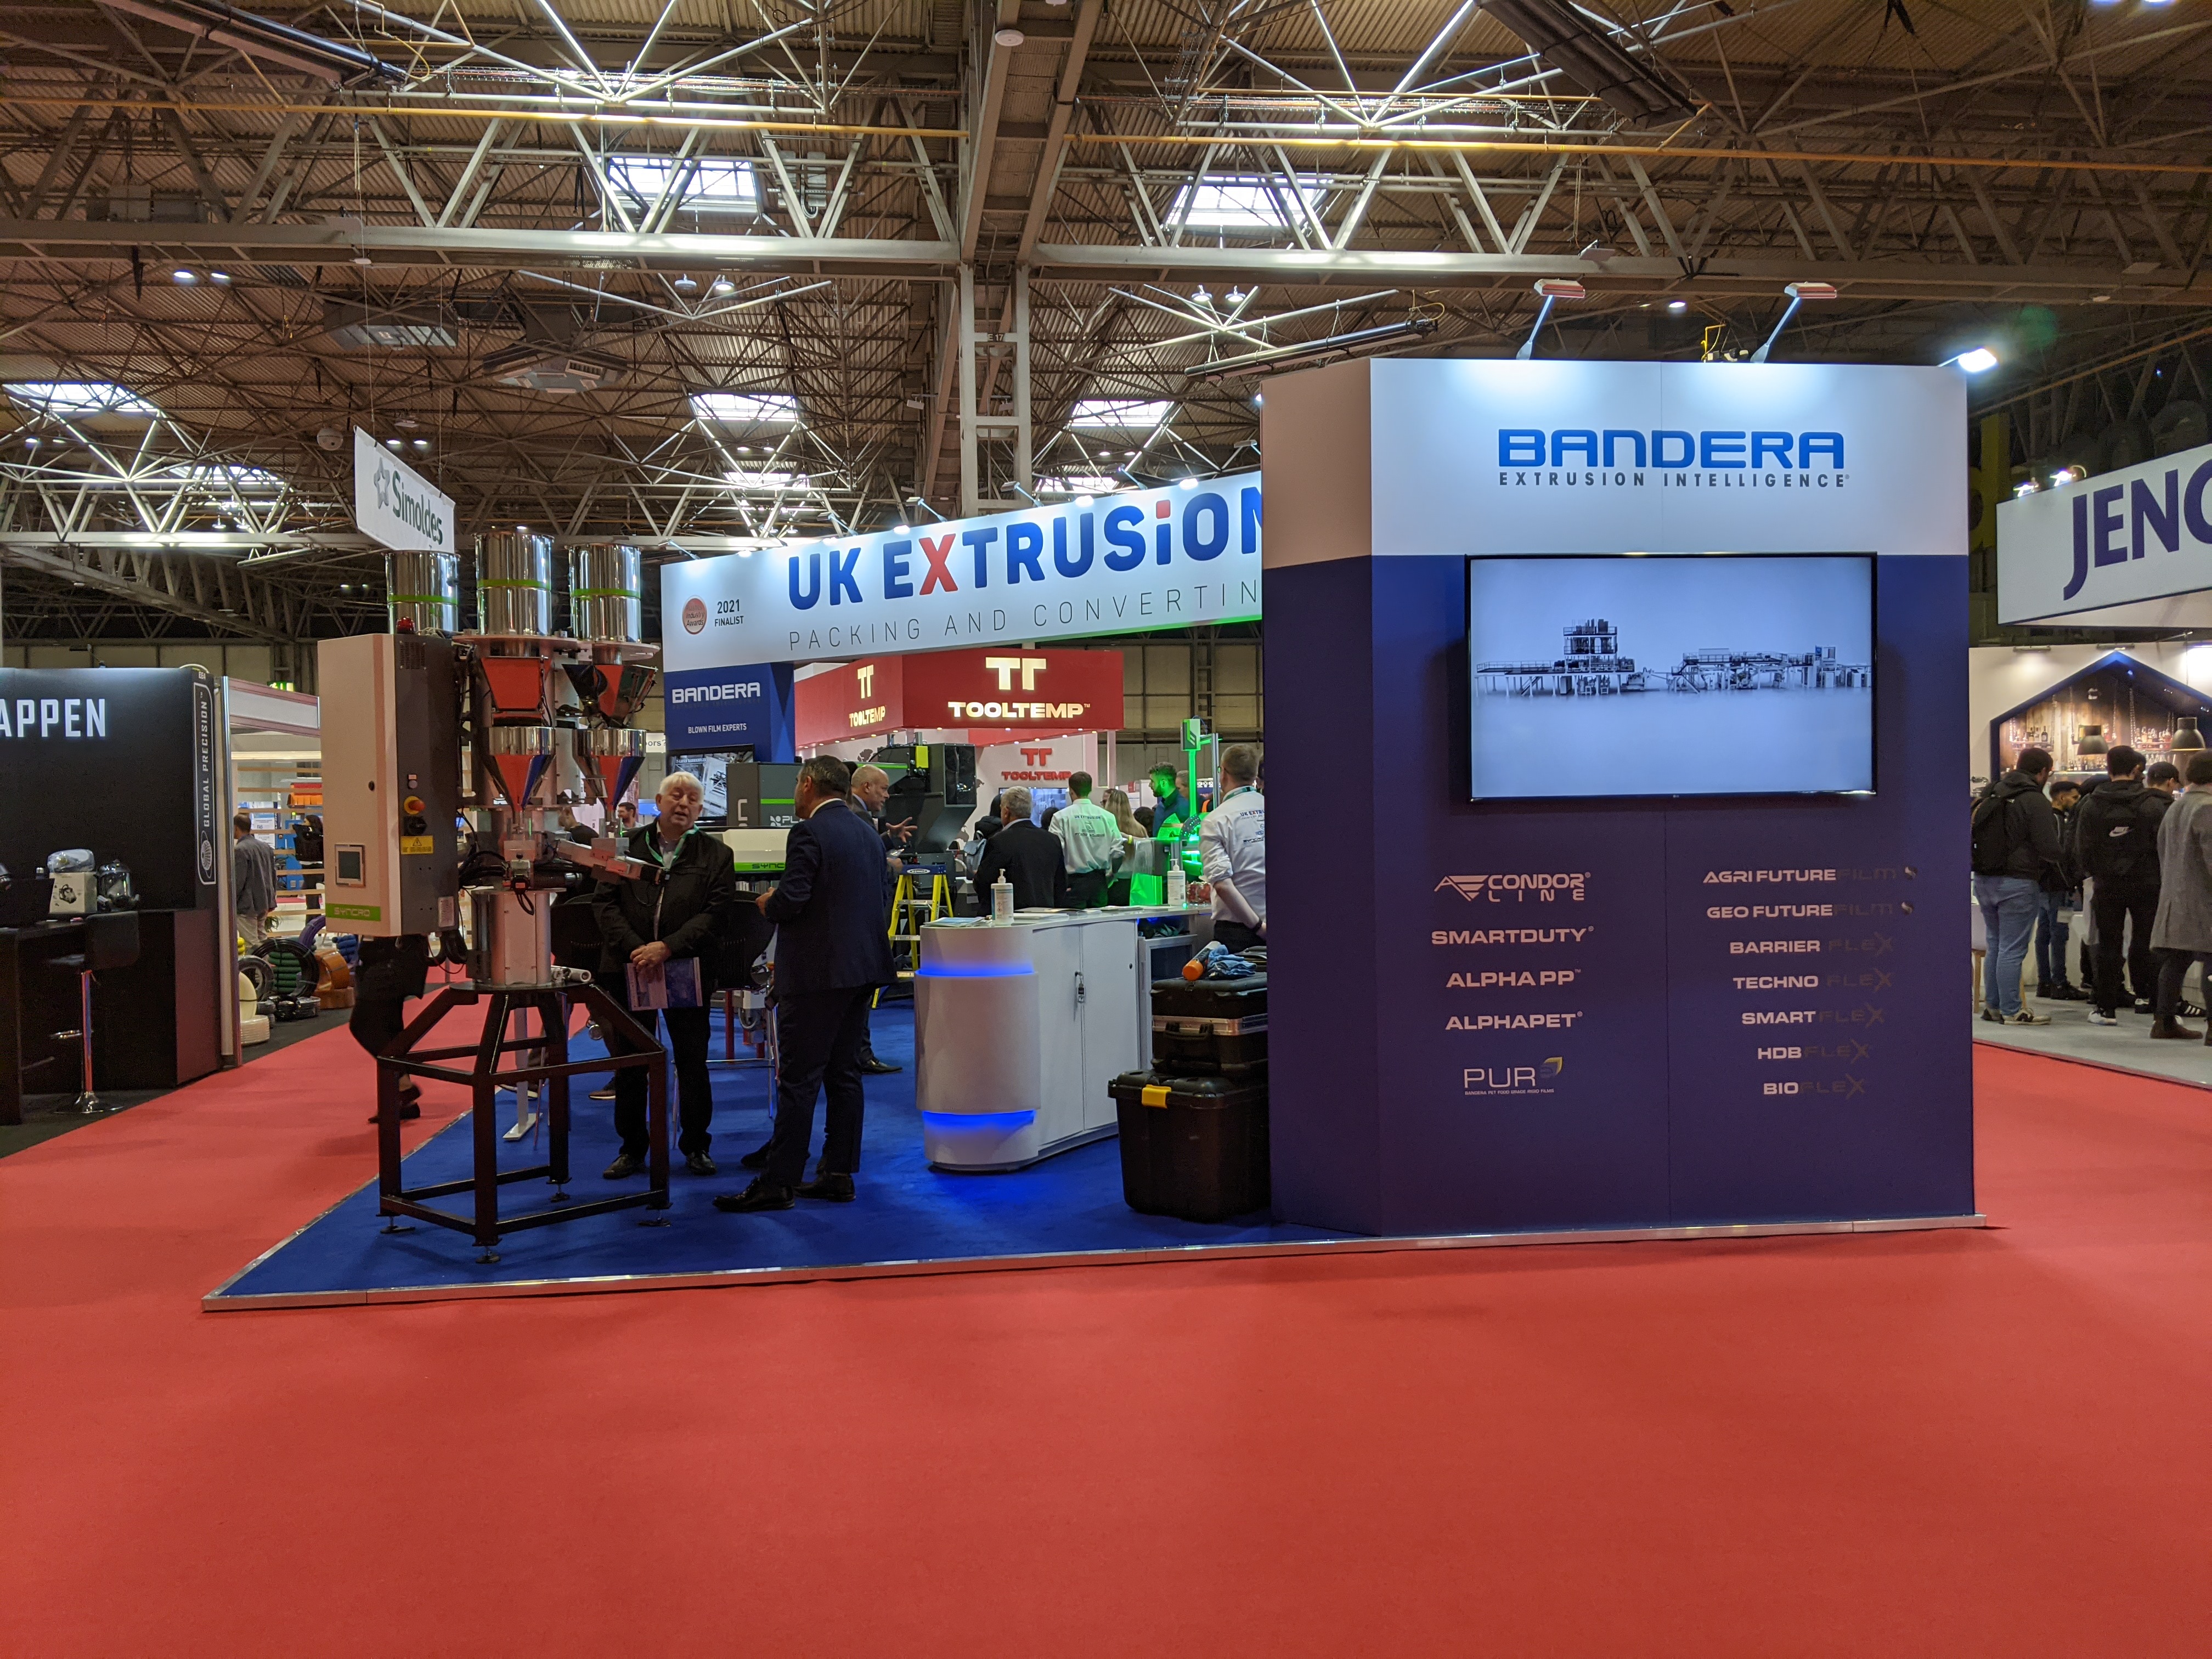 image of the UK Extrusion stand at Interplas UK 2021